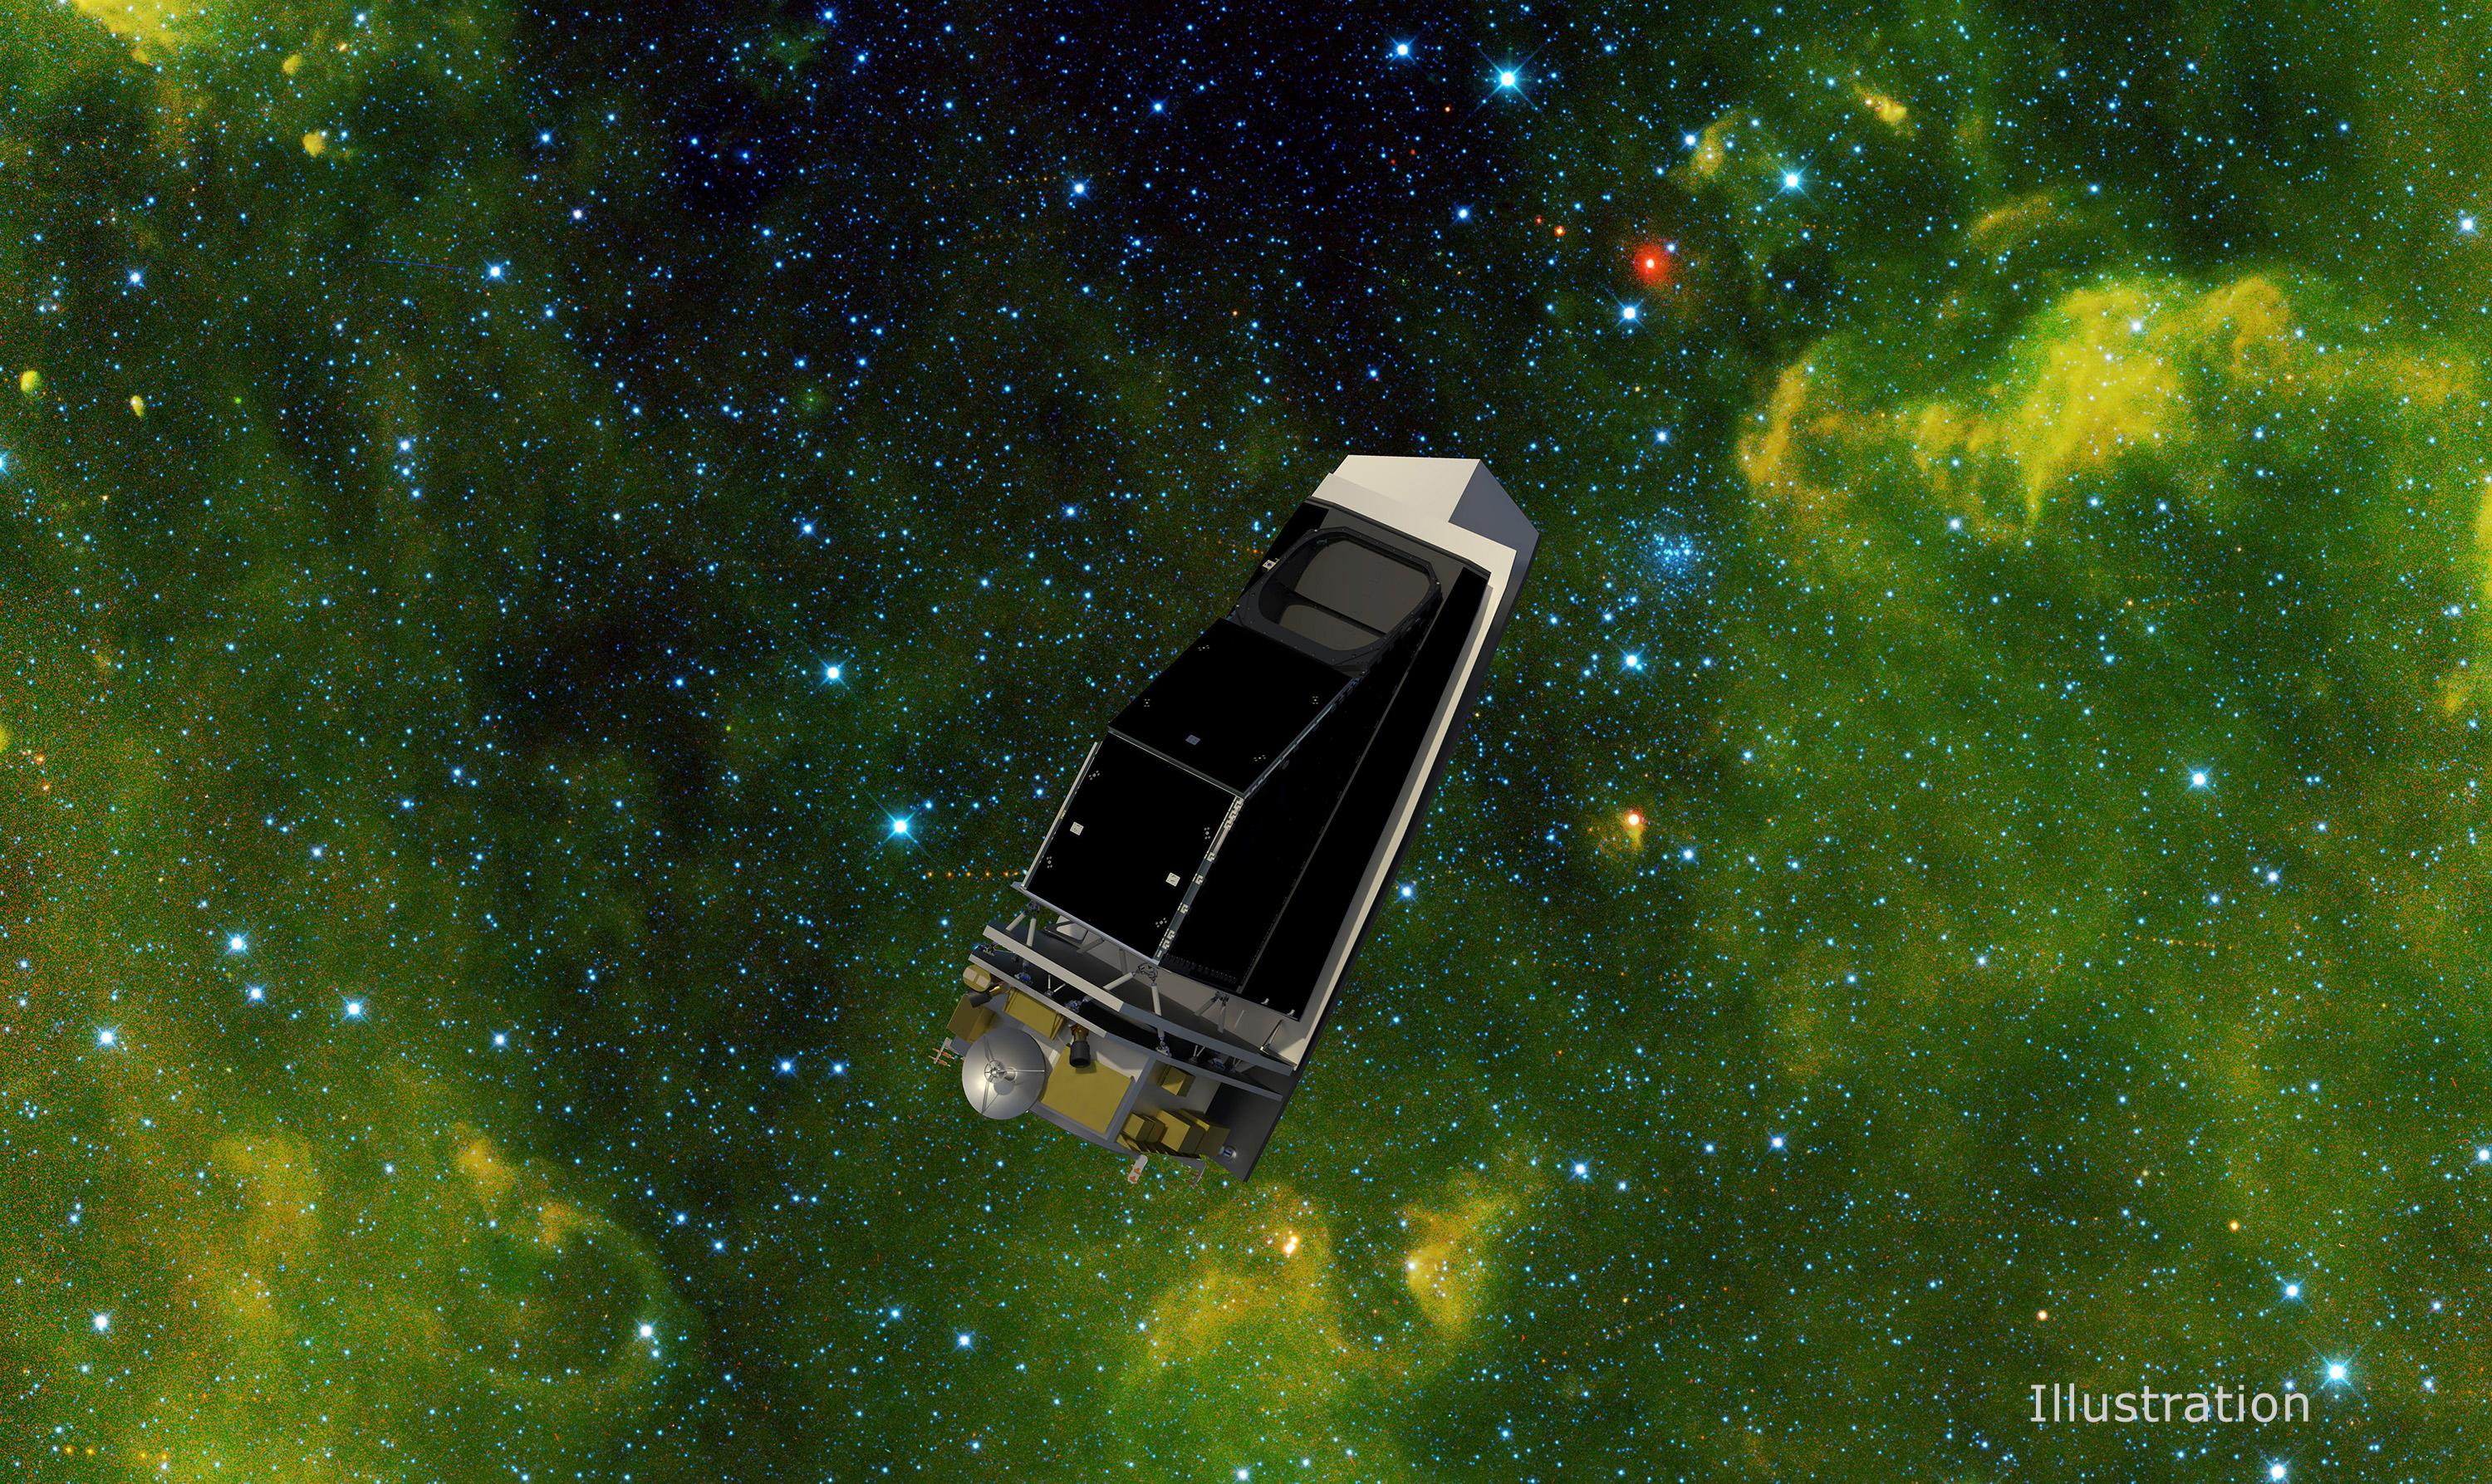 An illustration of the NEO Surveyor spacecraft floating in a green and yellow starfield. The spacecraft has a silver back and a black top.